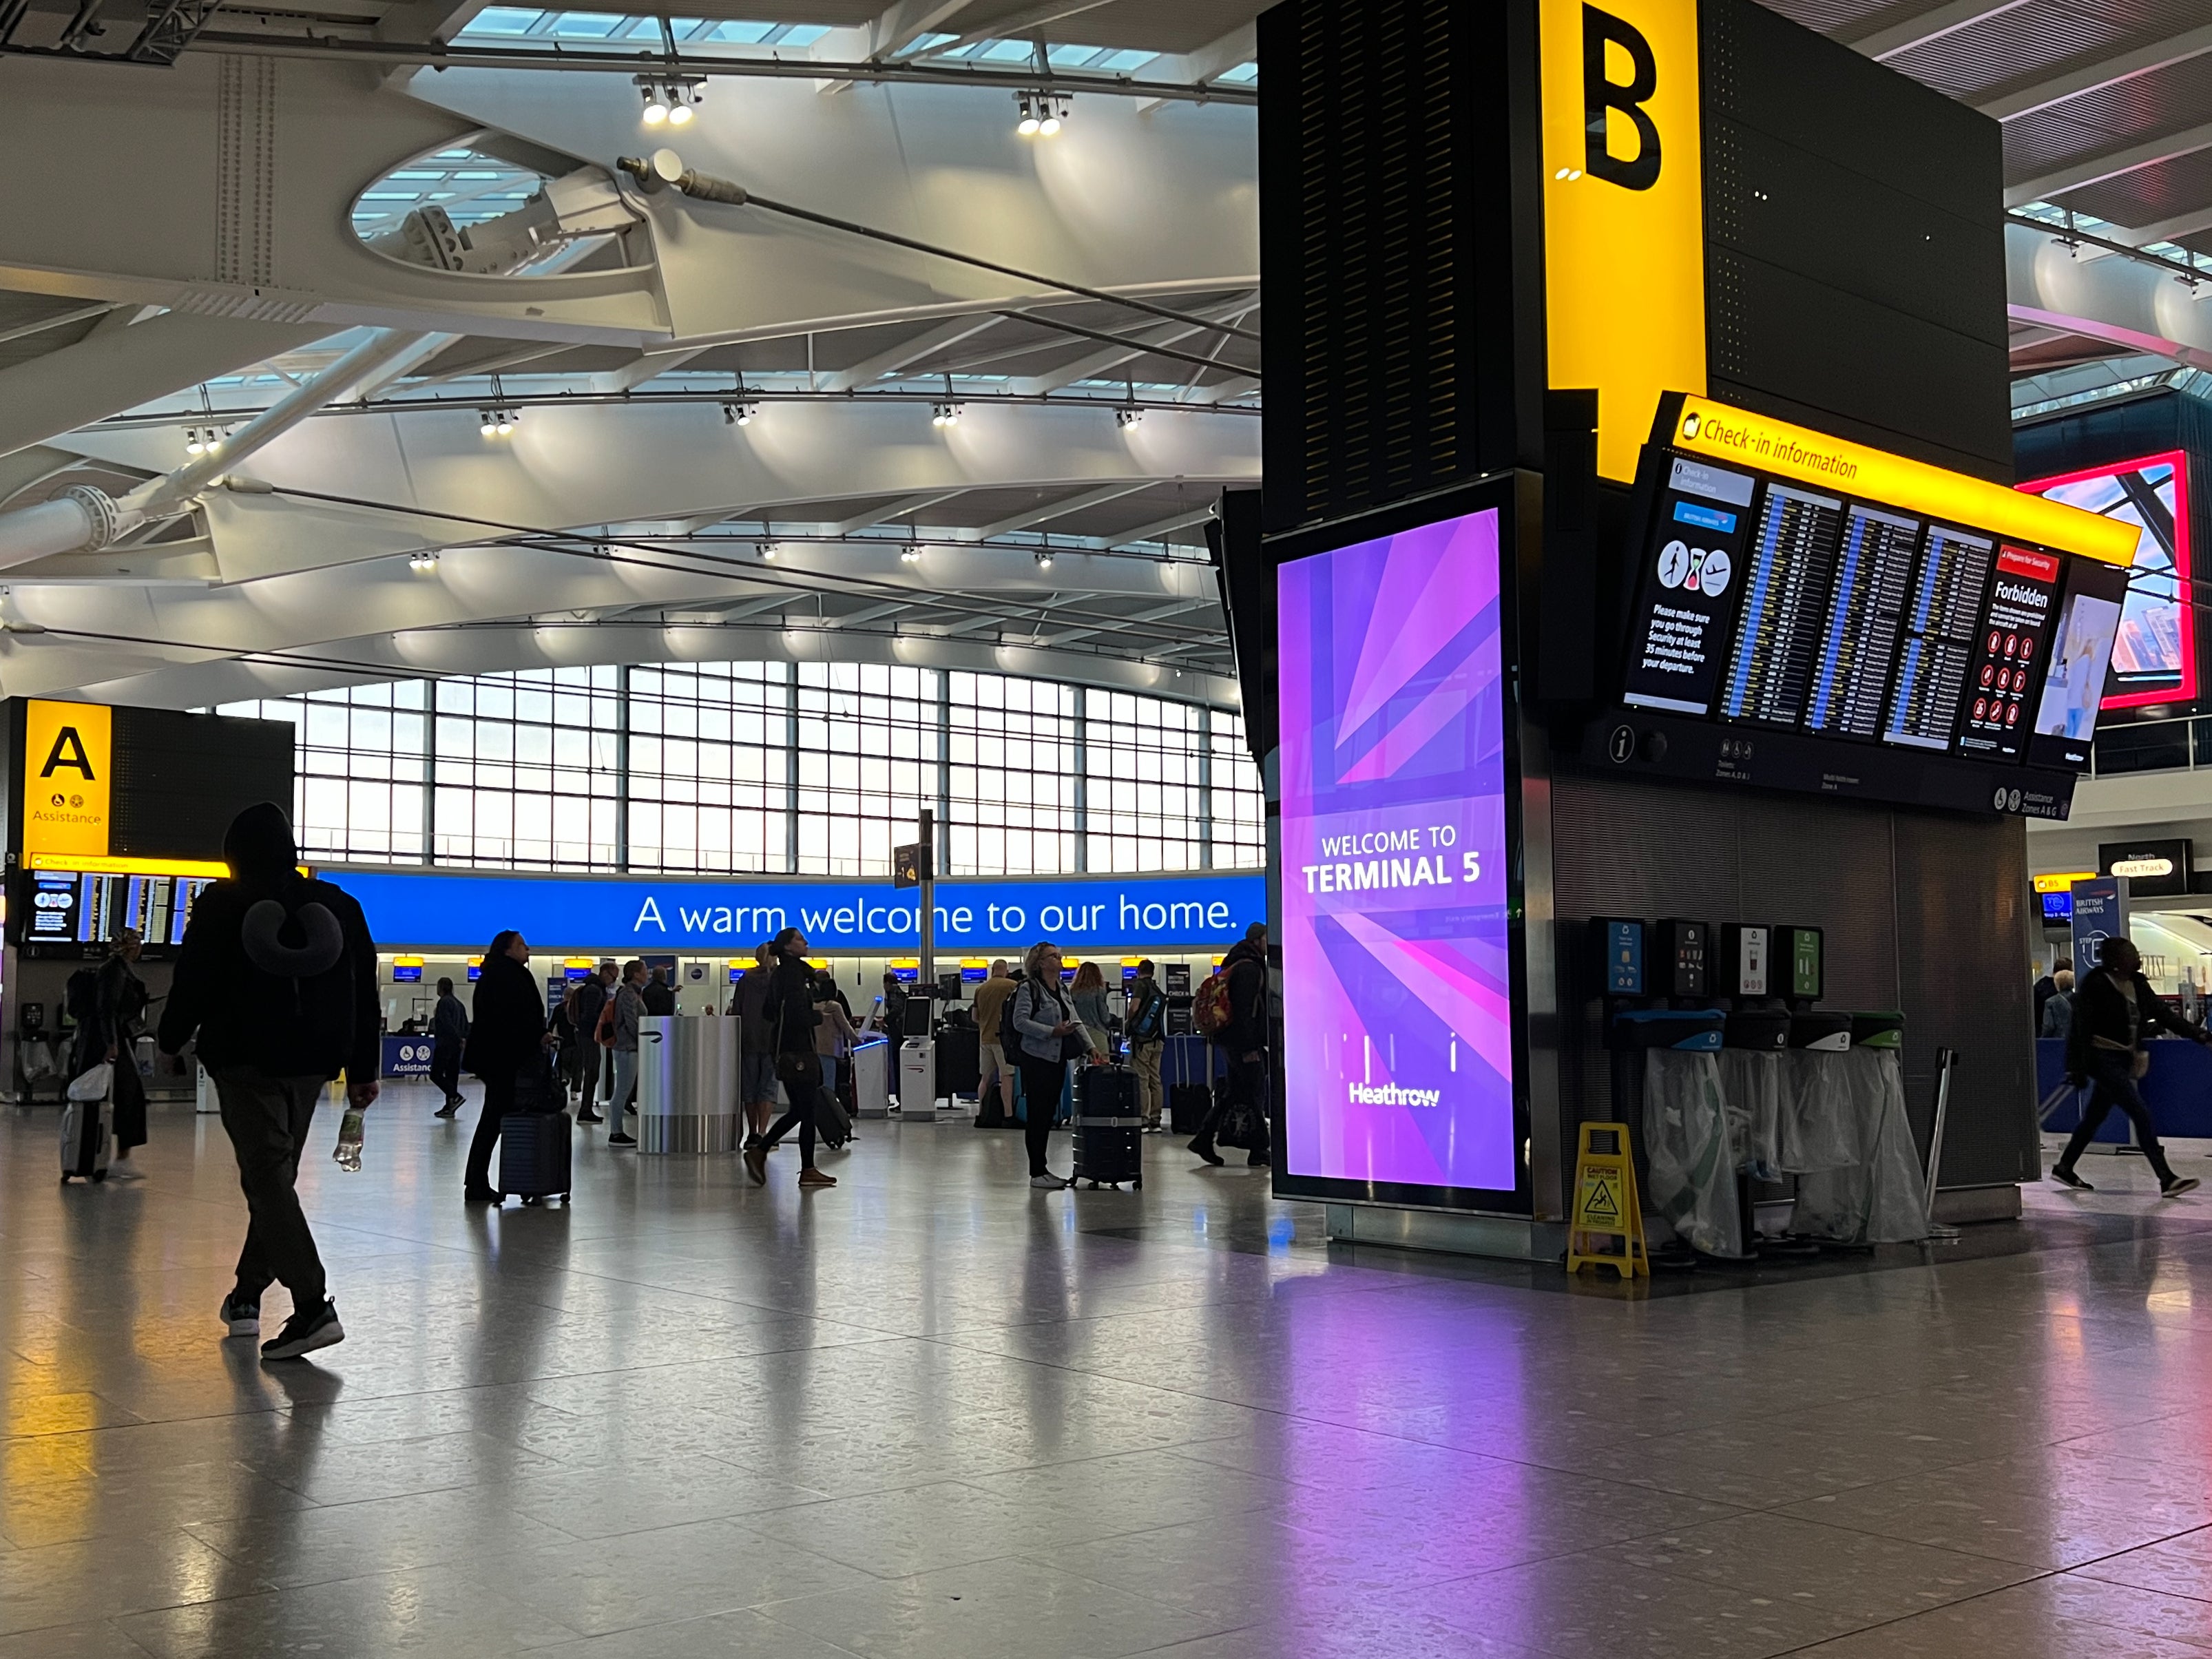 Going places: London Heathrow airport’s Terminal 5, the home of British Airways